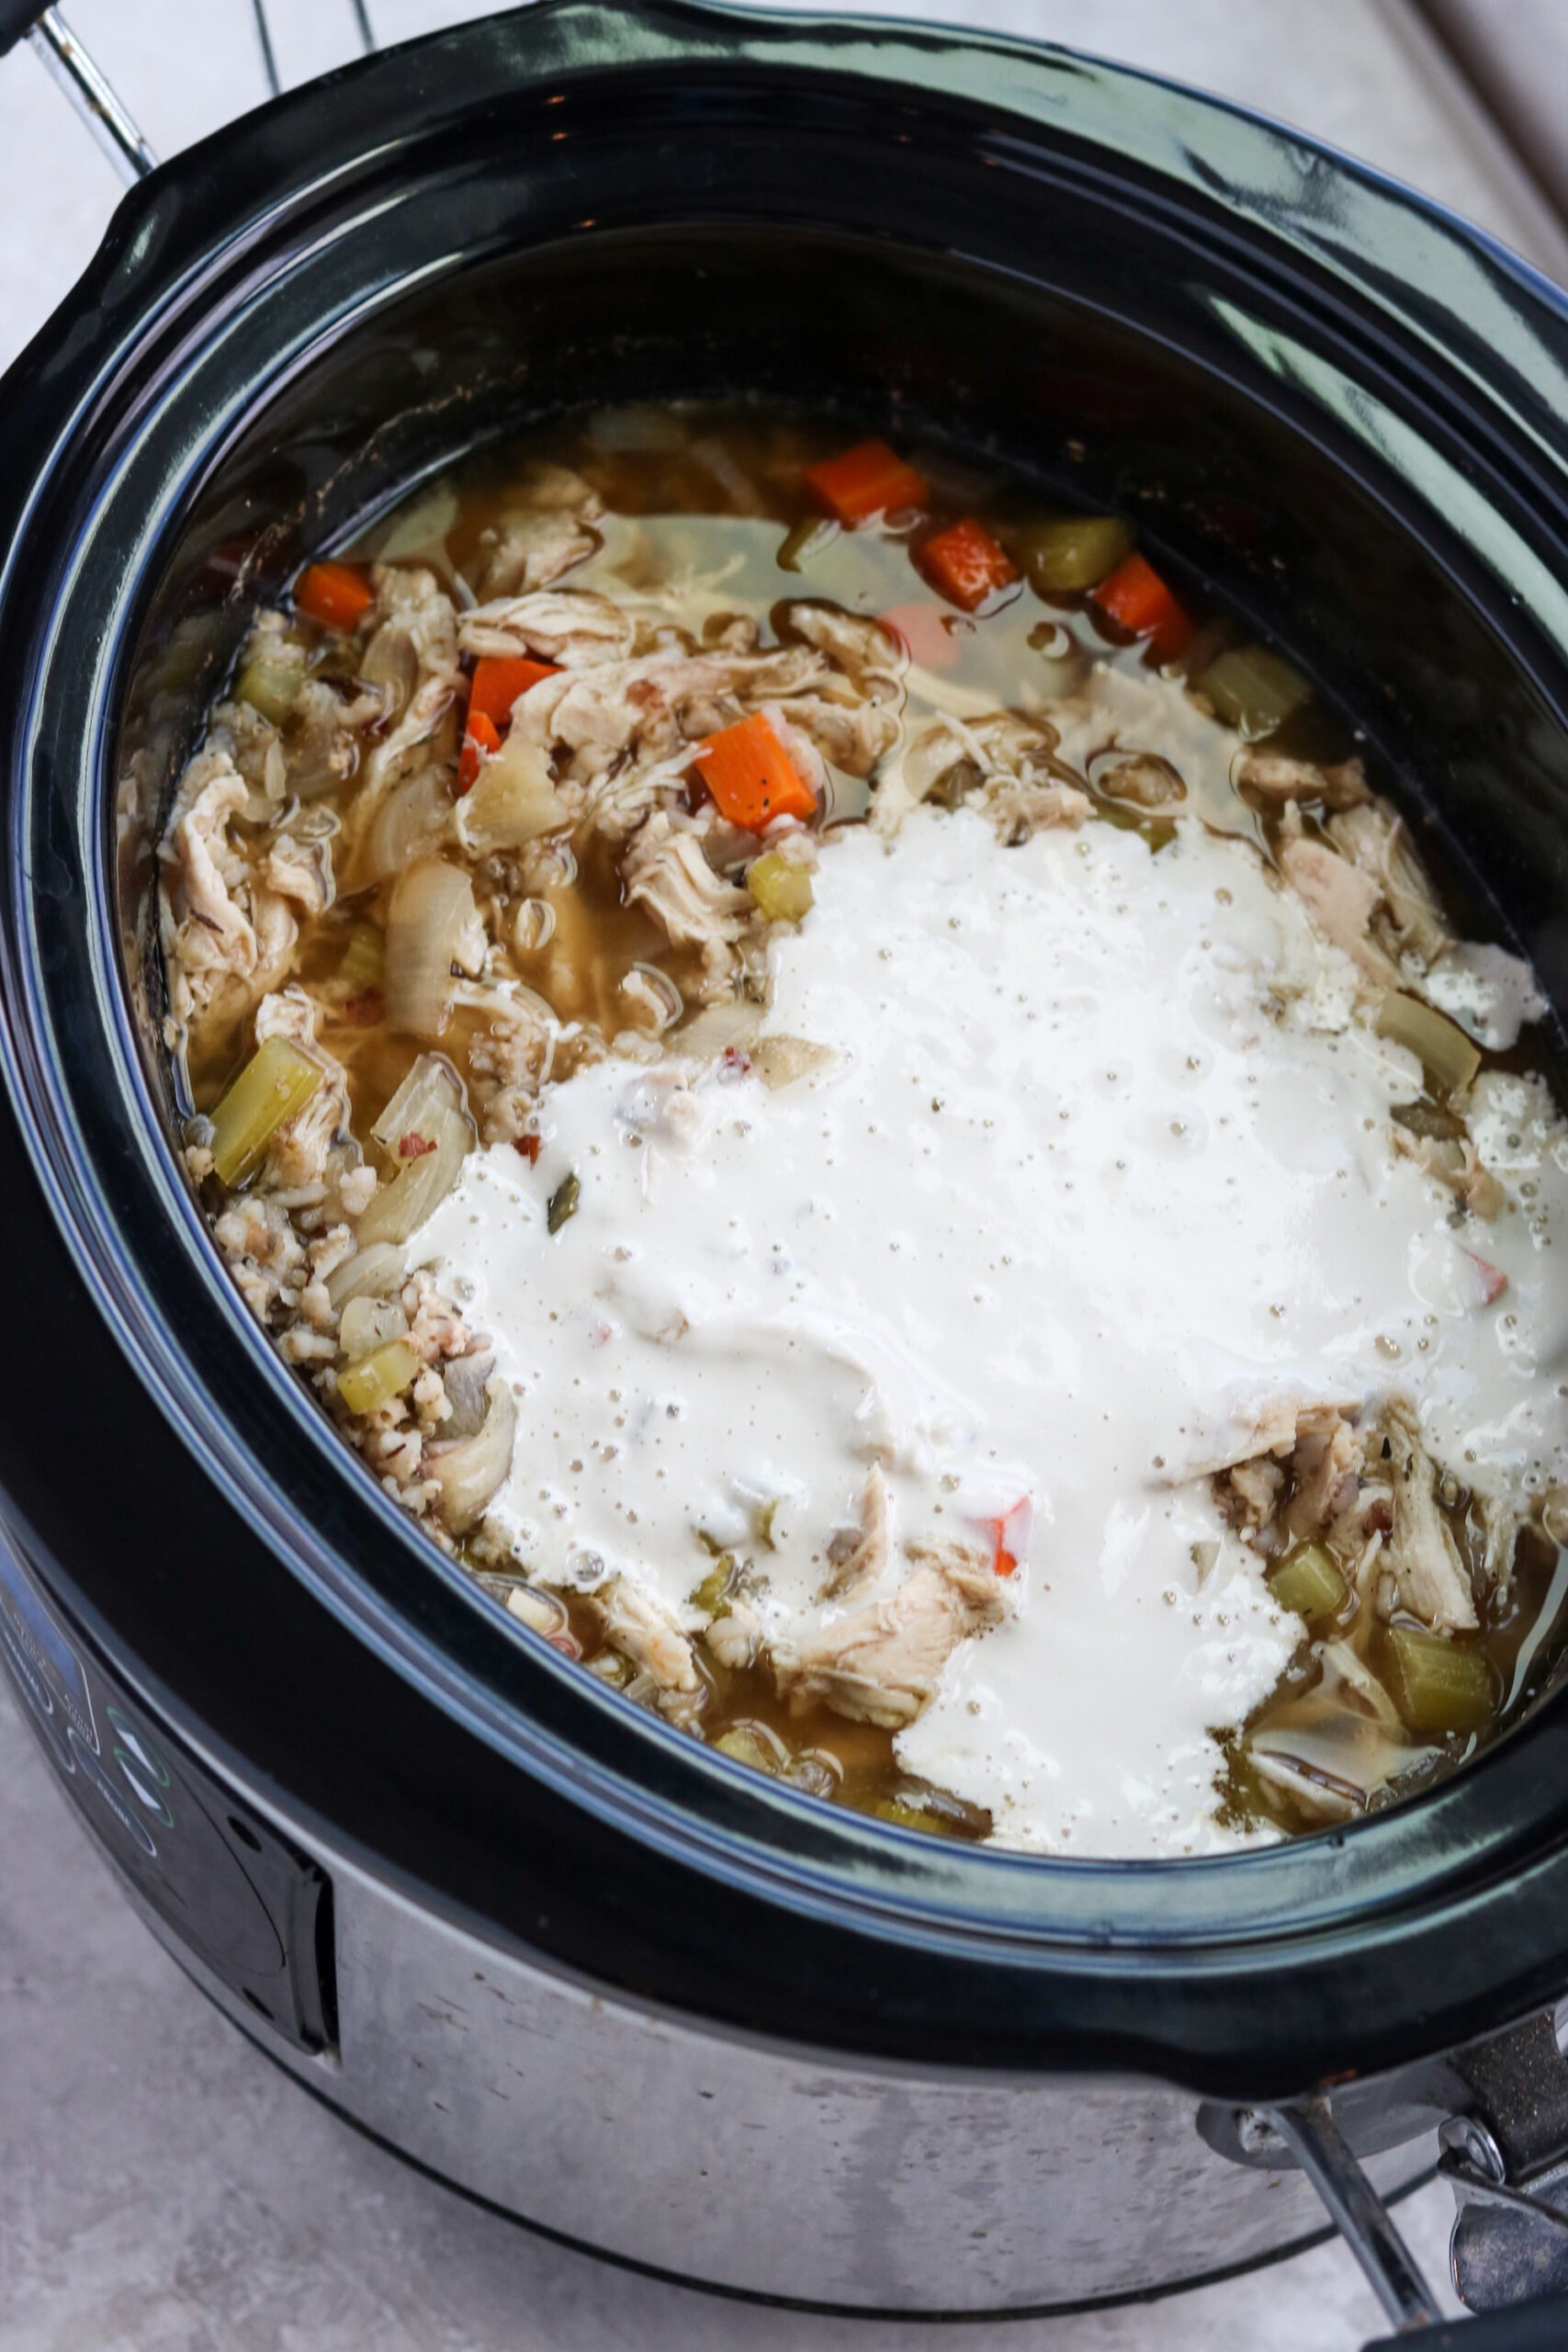 Cashew cream poured into slow cooker soup